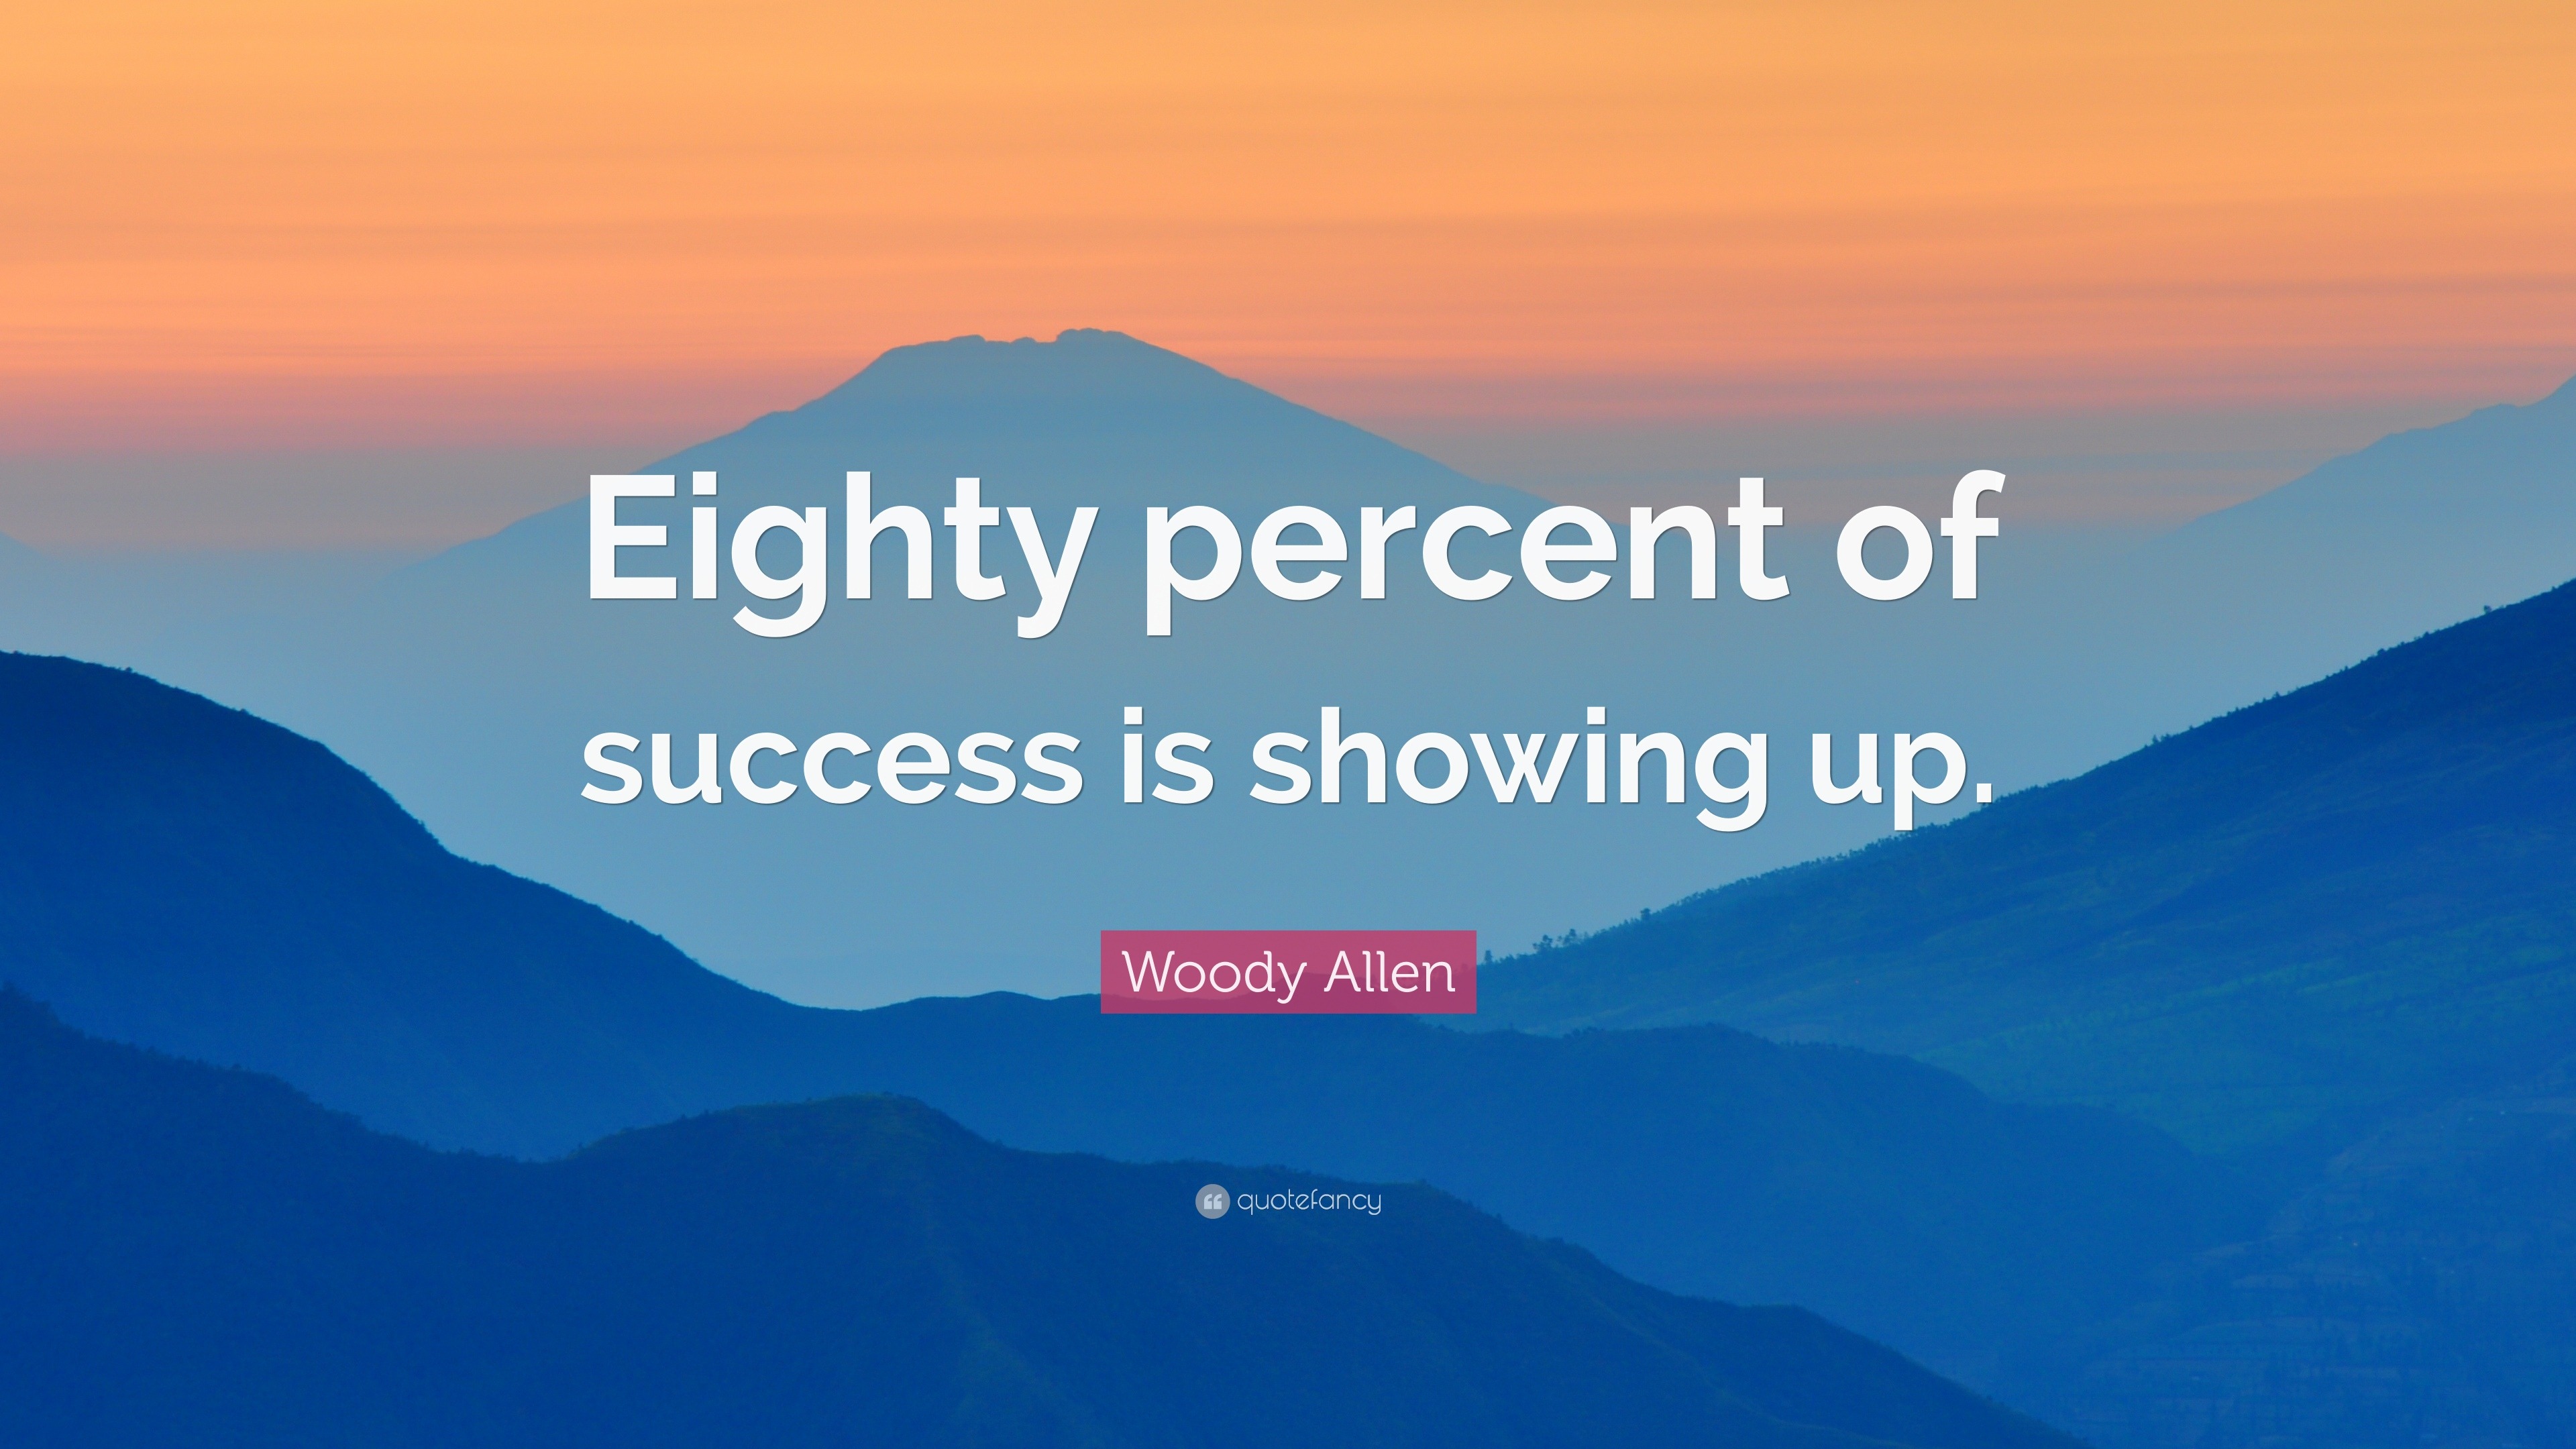 Woody Allen Quote “eighty Percent Of Success Is Showing Up” 6329